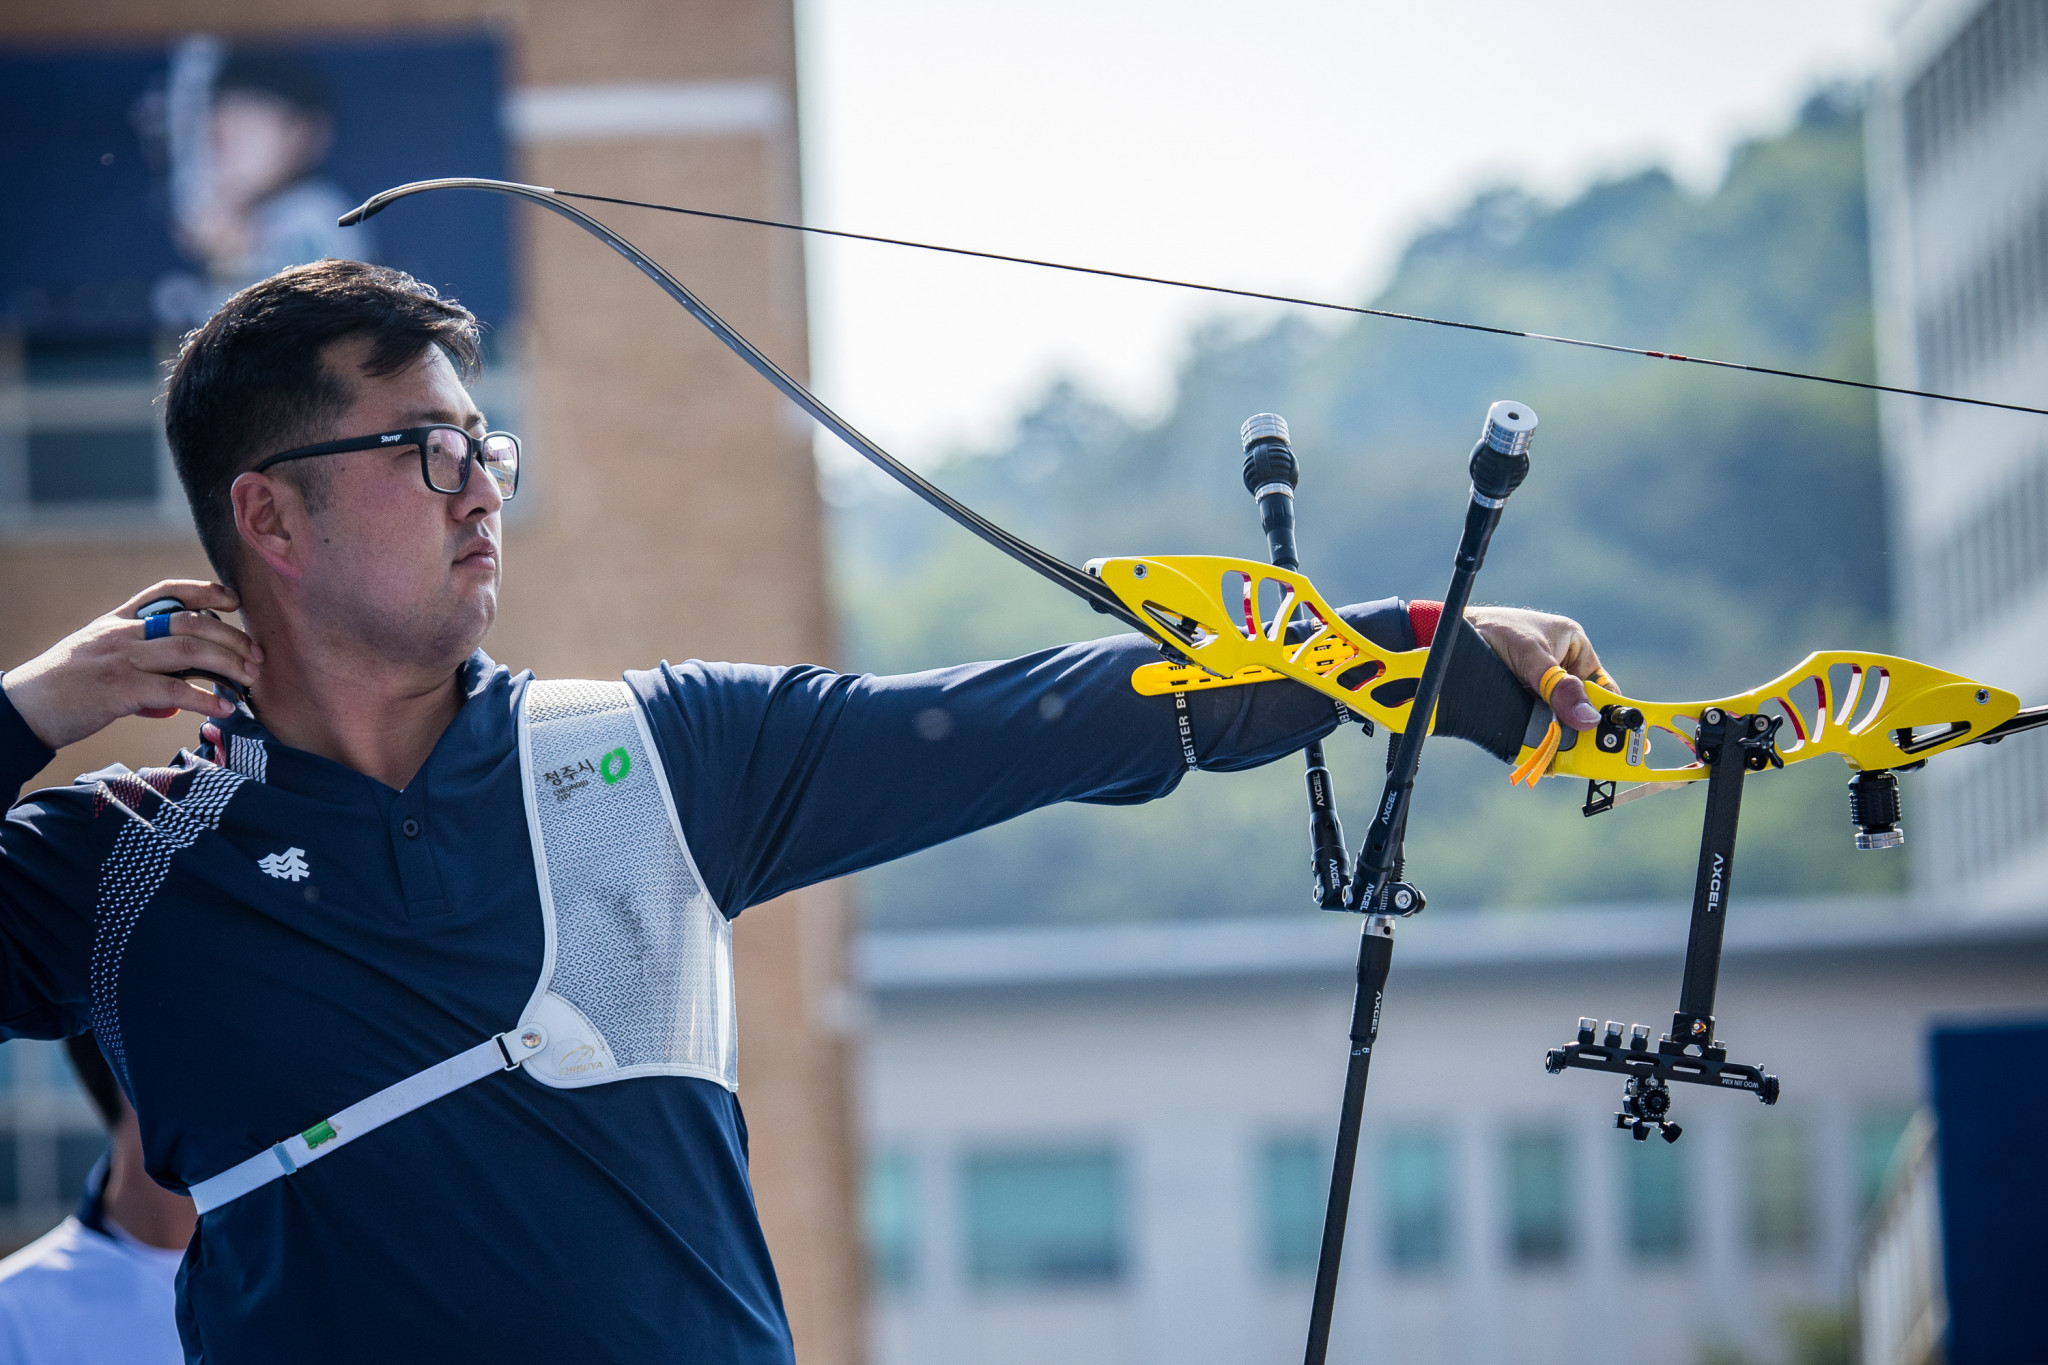 Kim Woo-jin played a key role in South Korea's gold medal win in the men's team recurve final in Paris ©Getty Images